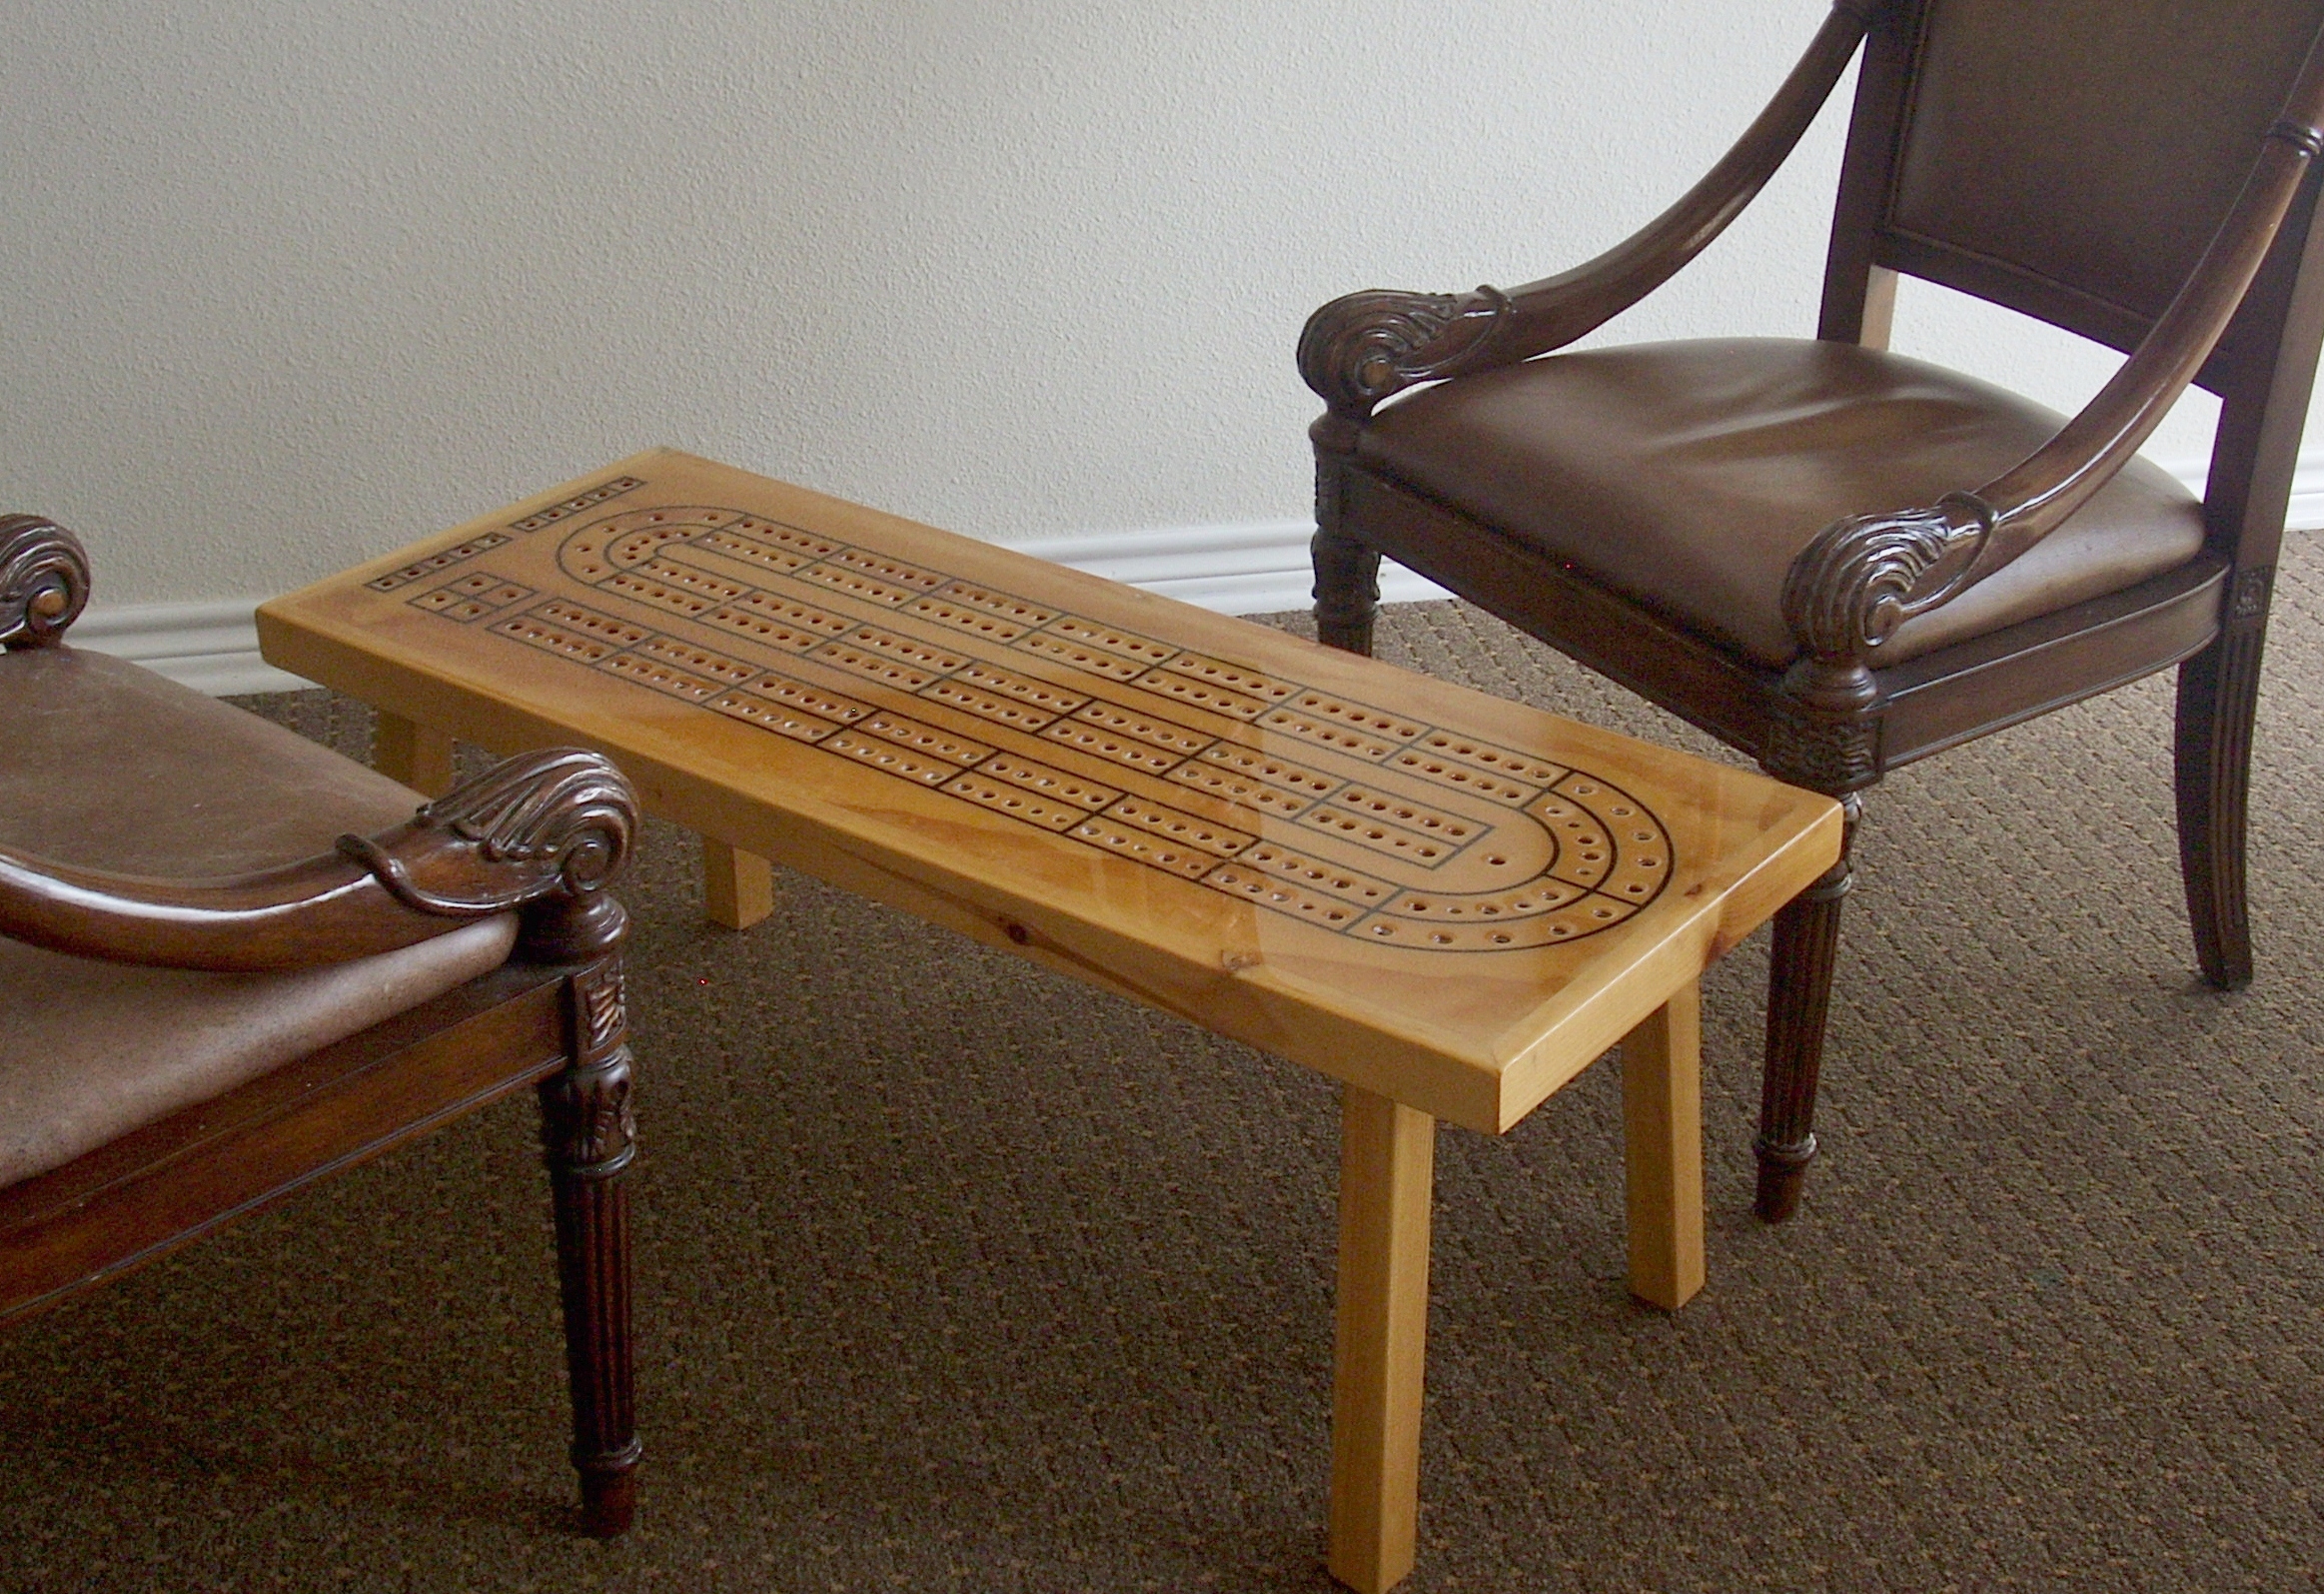 cribbage board coffee table | therightjack